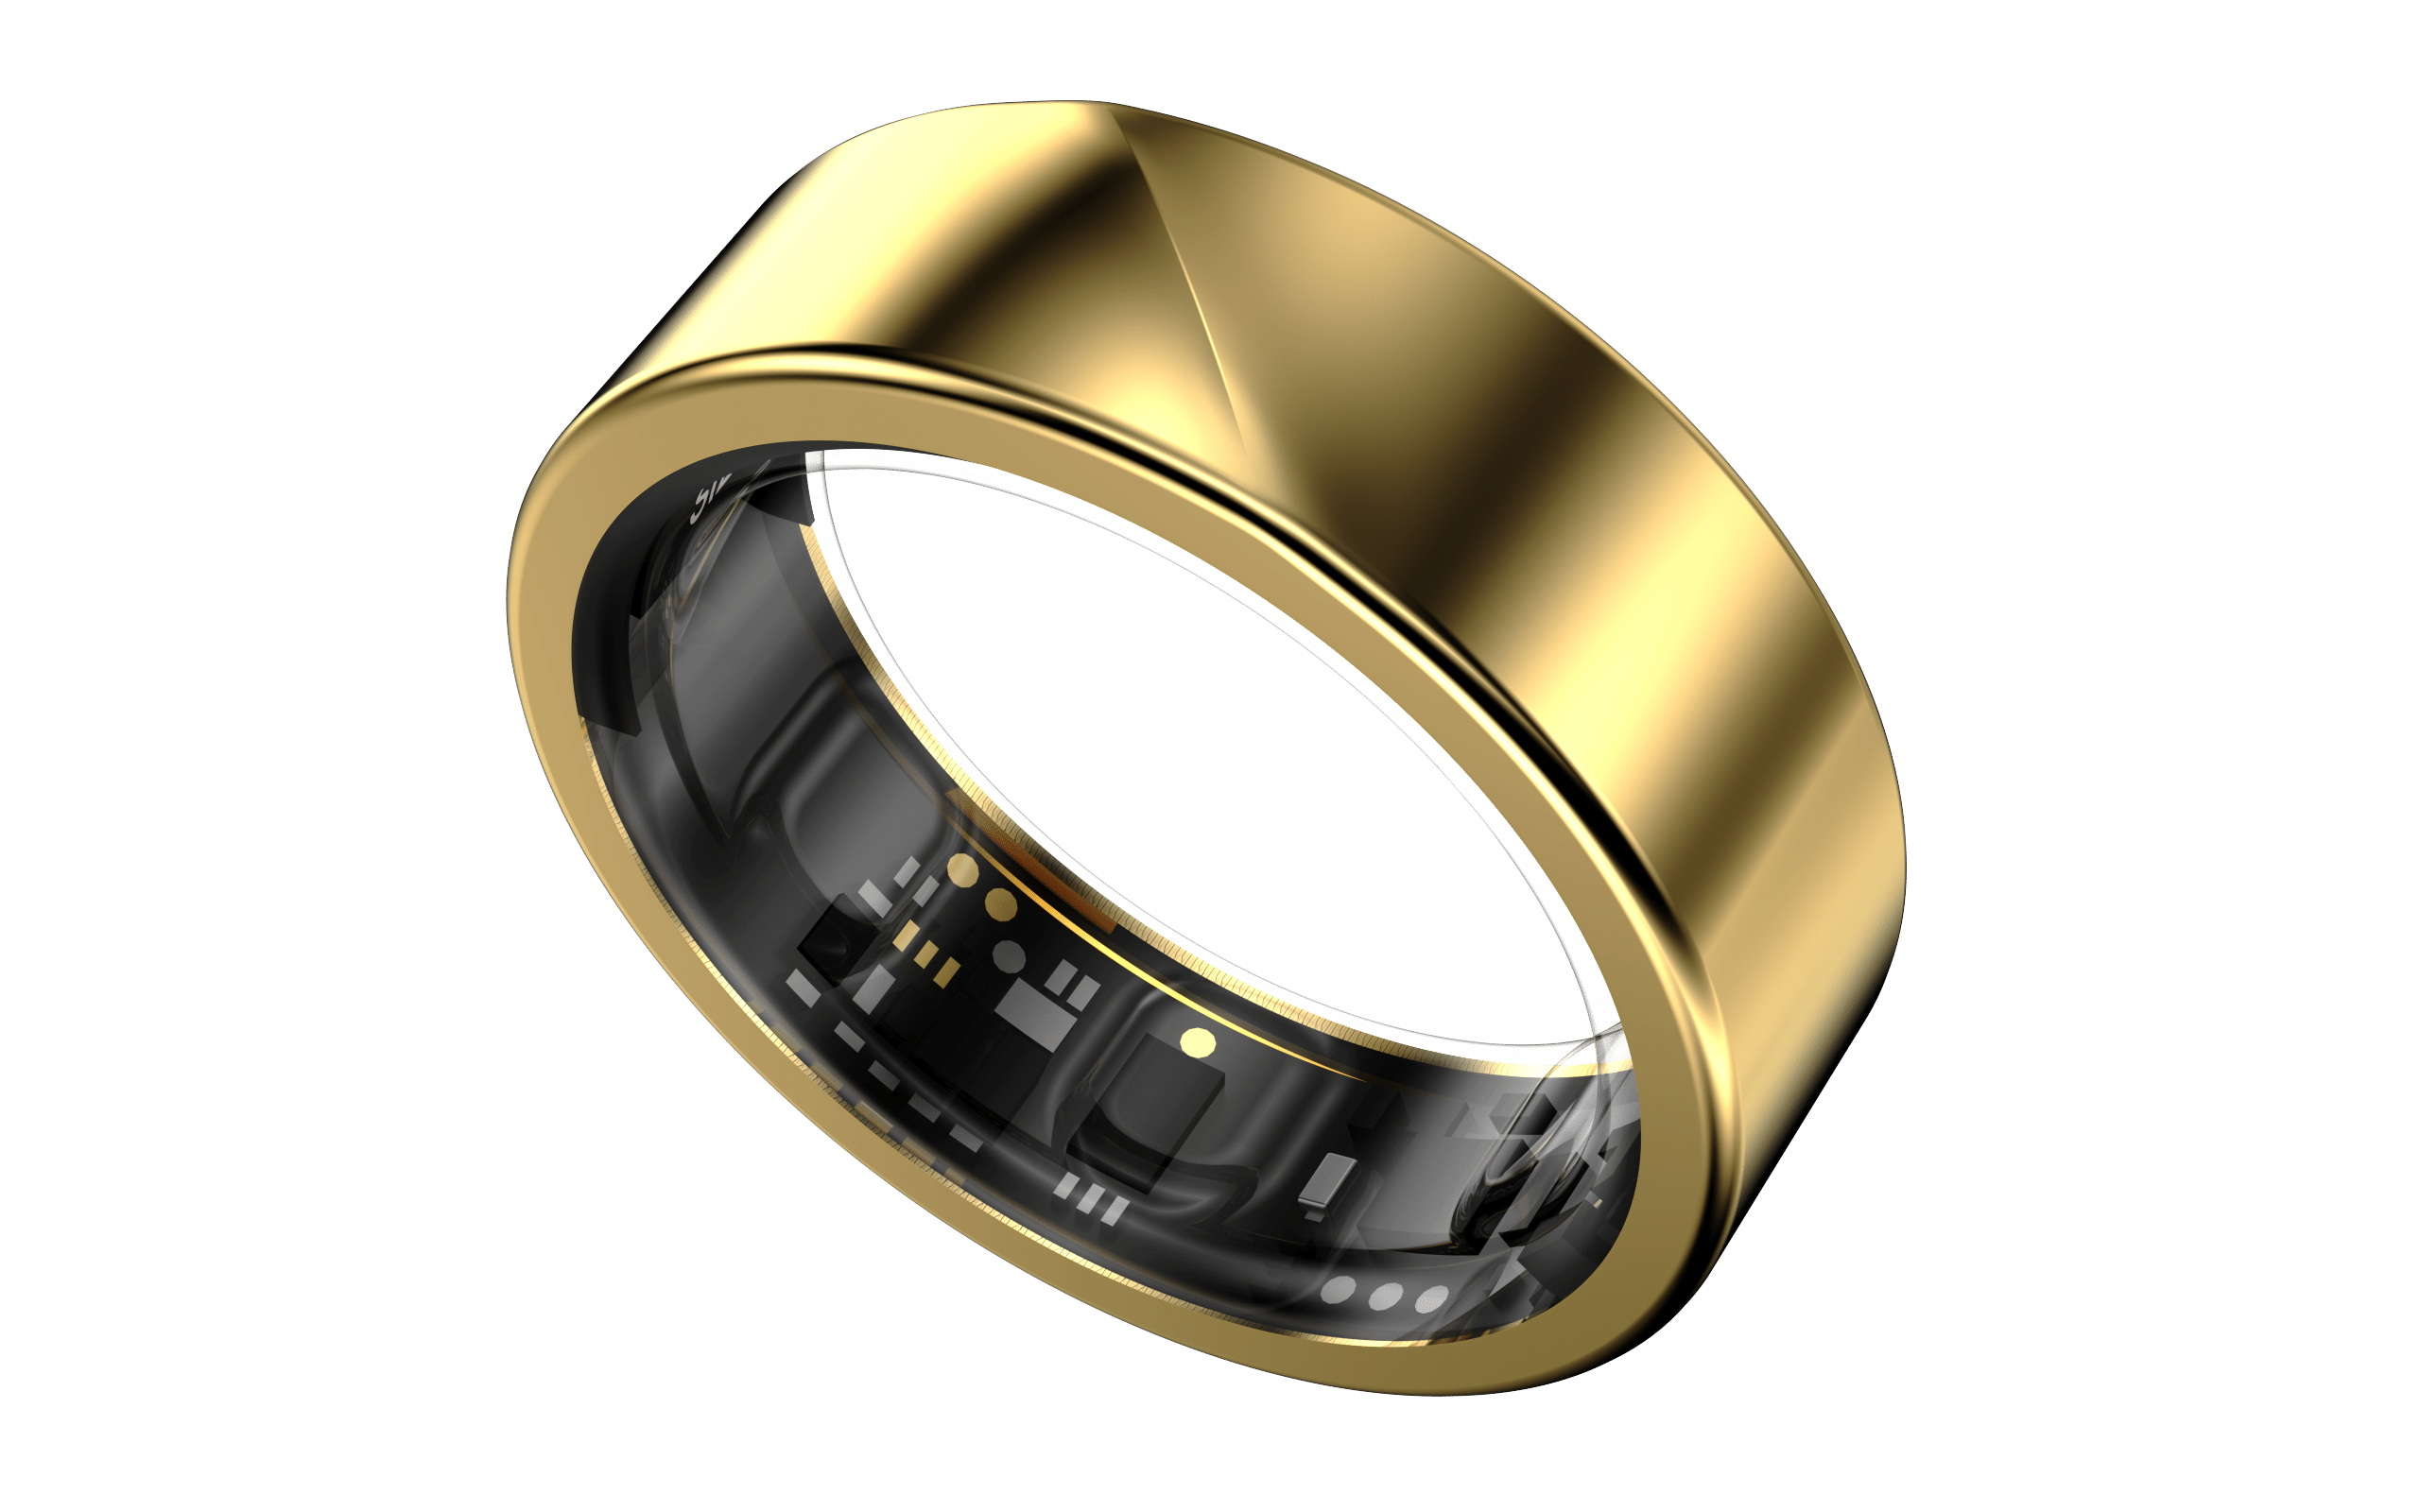 Noise Luna Ring smart ring launched in India: pre-order details